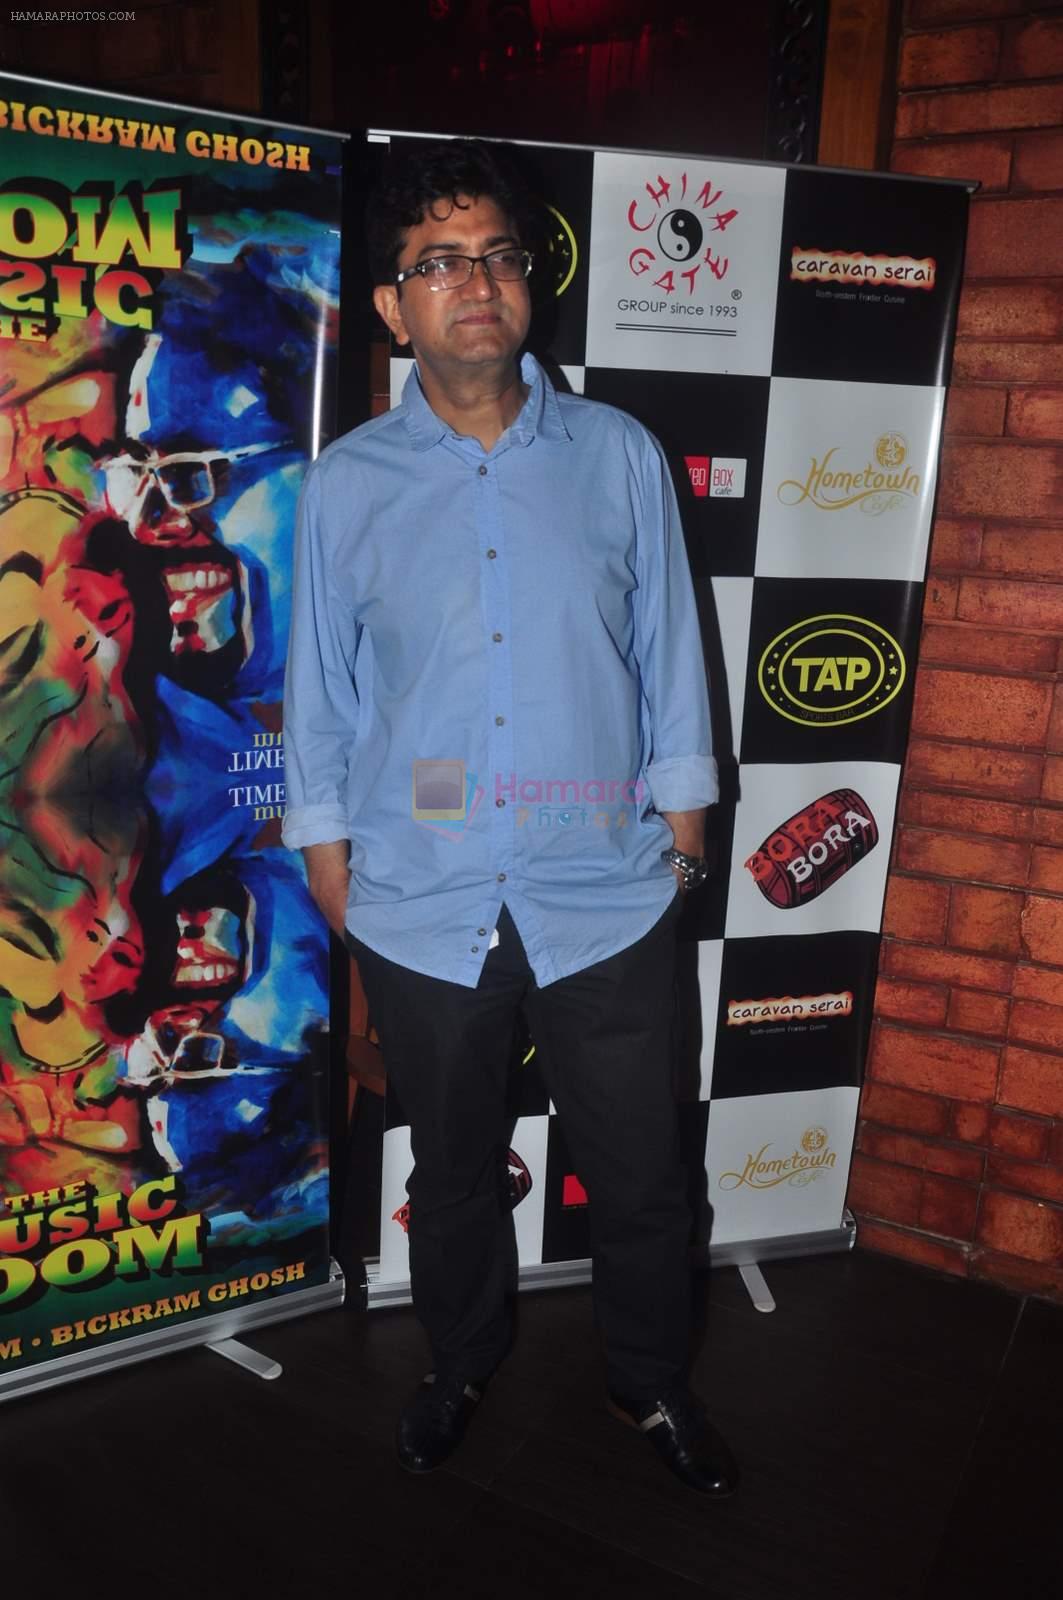 Parsoon Joshi at Bickram ghosh's album launch in Tap Bar on 25th Feb 2015